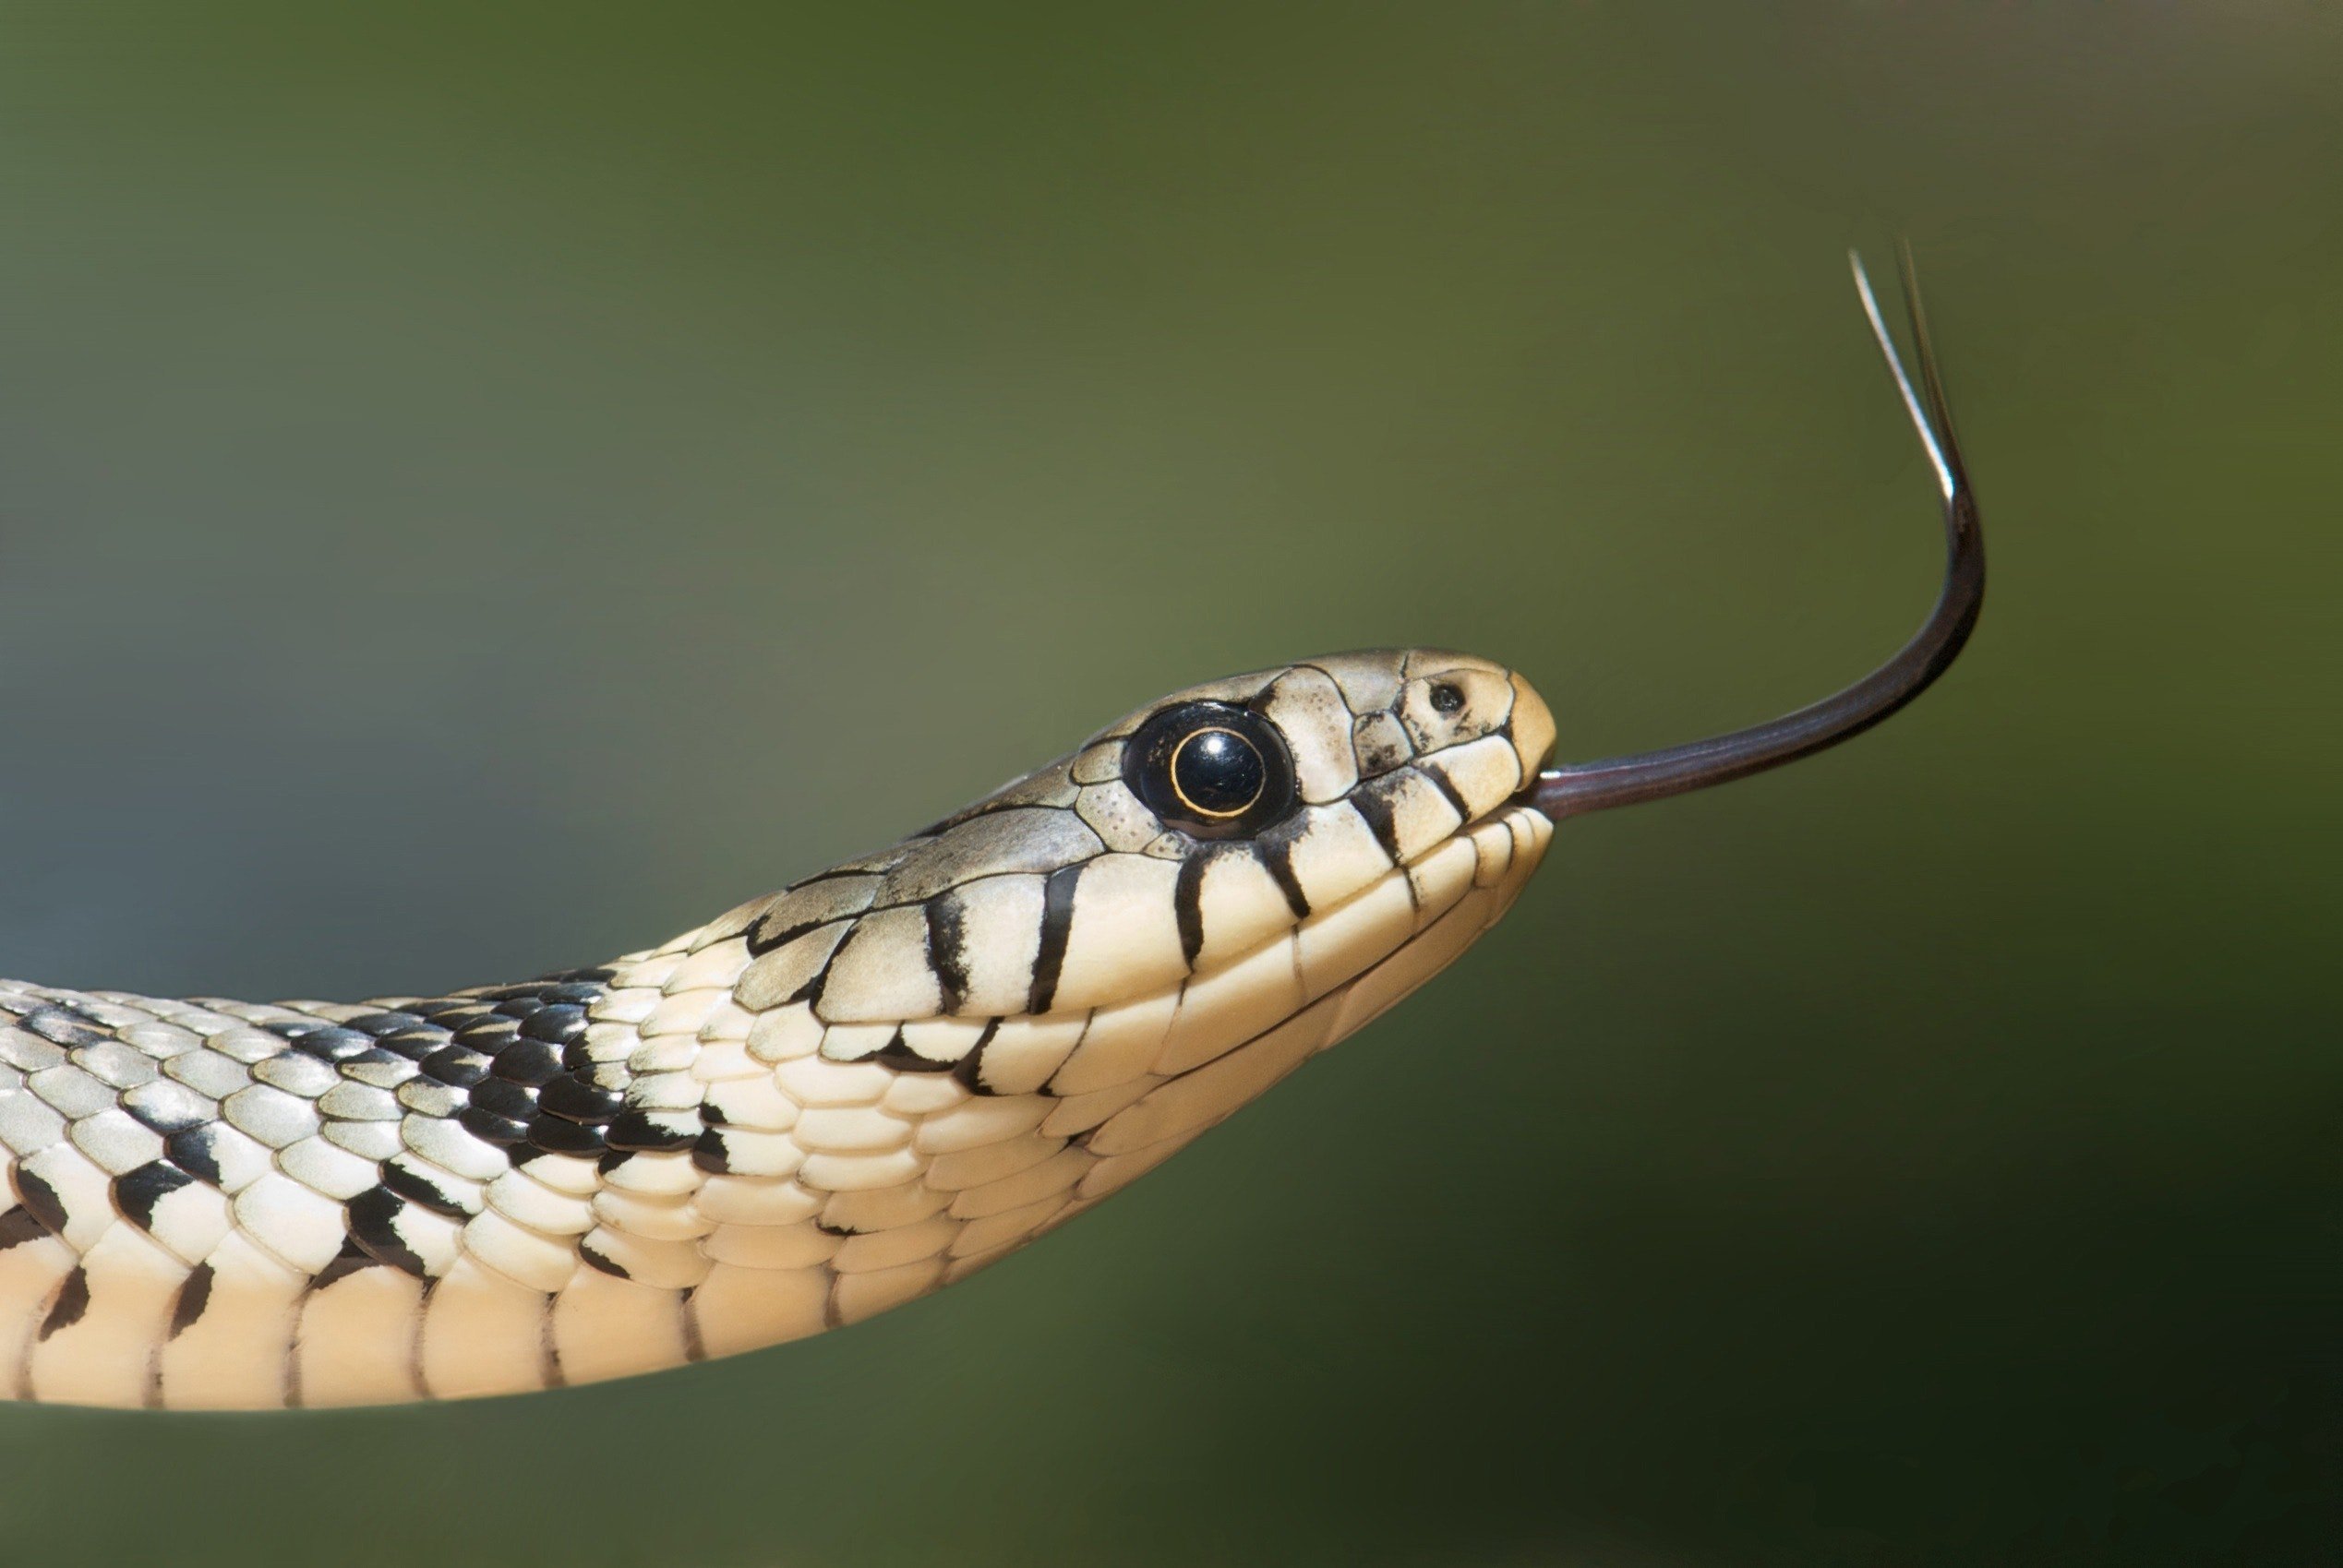 Picture of a snake. | Source: Pexels/ Pixabay